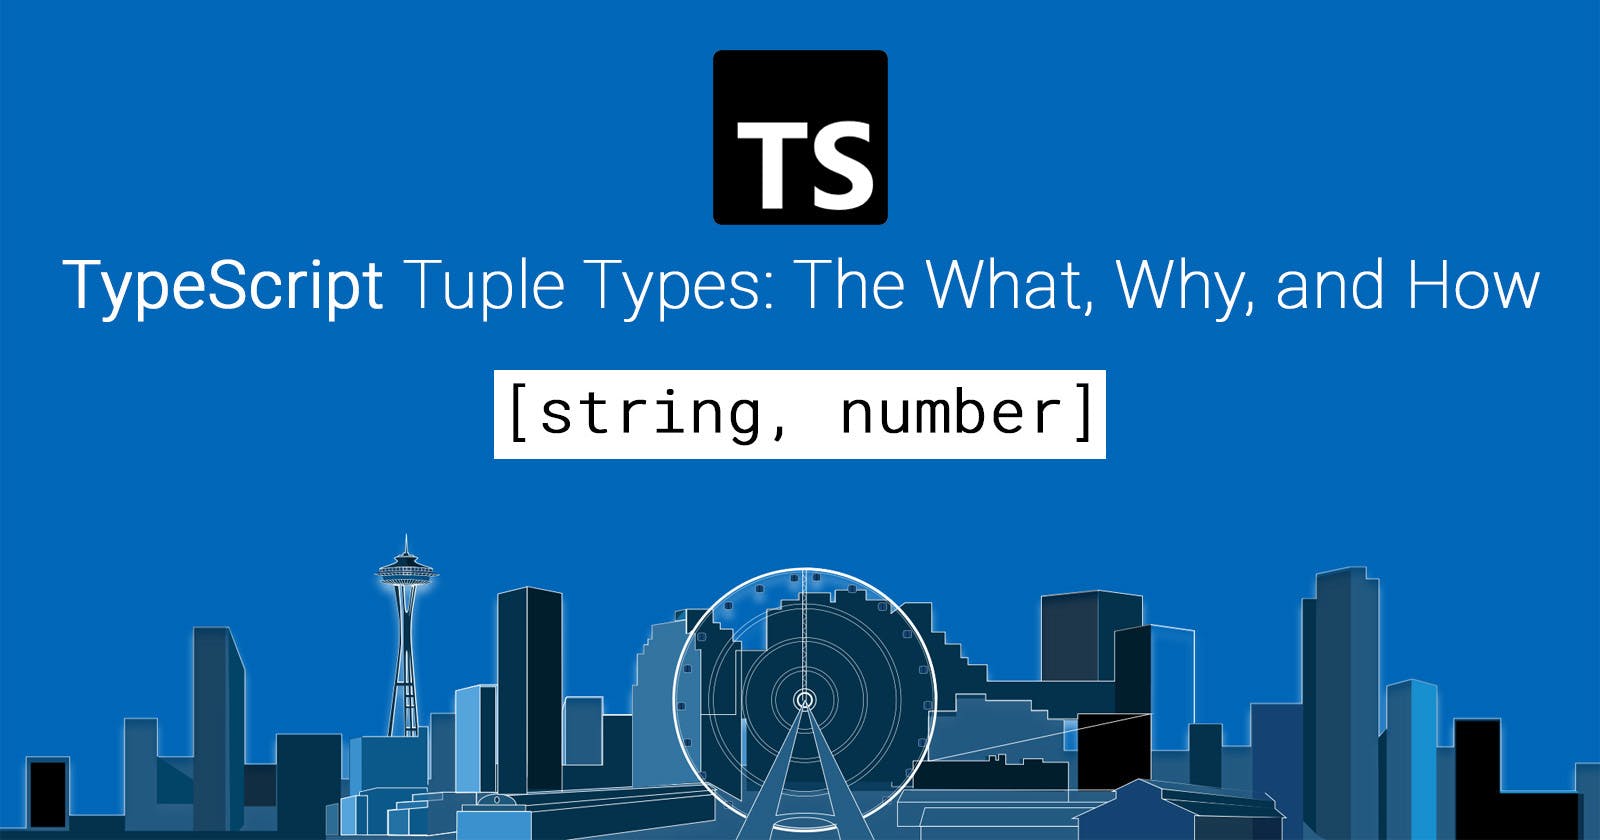 TypeScript Tuple Types: The What, Why, and How